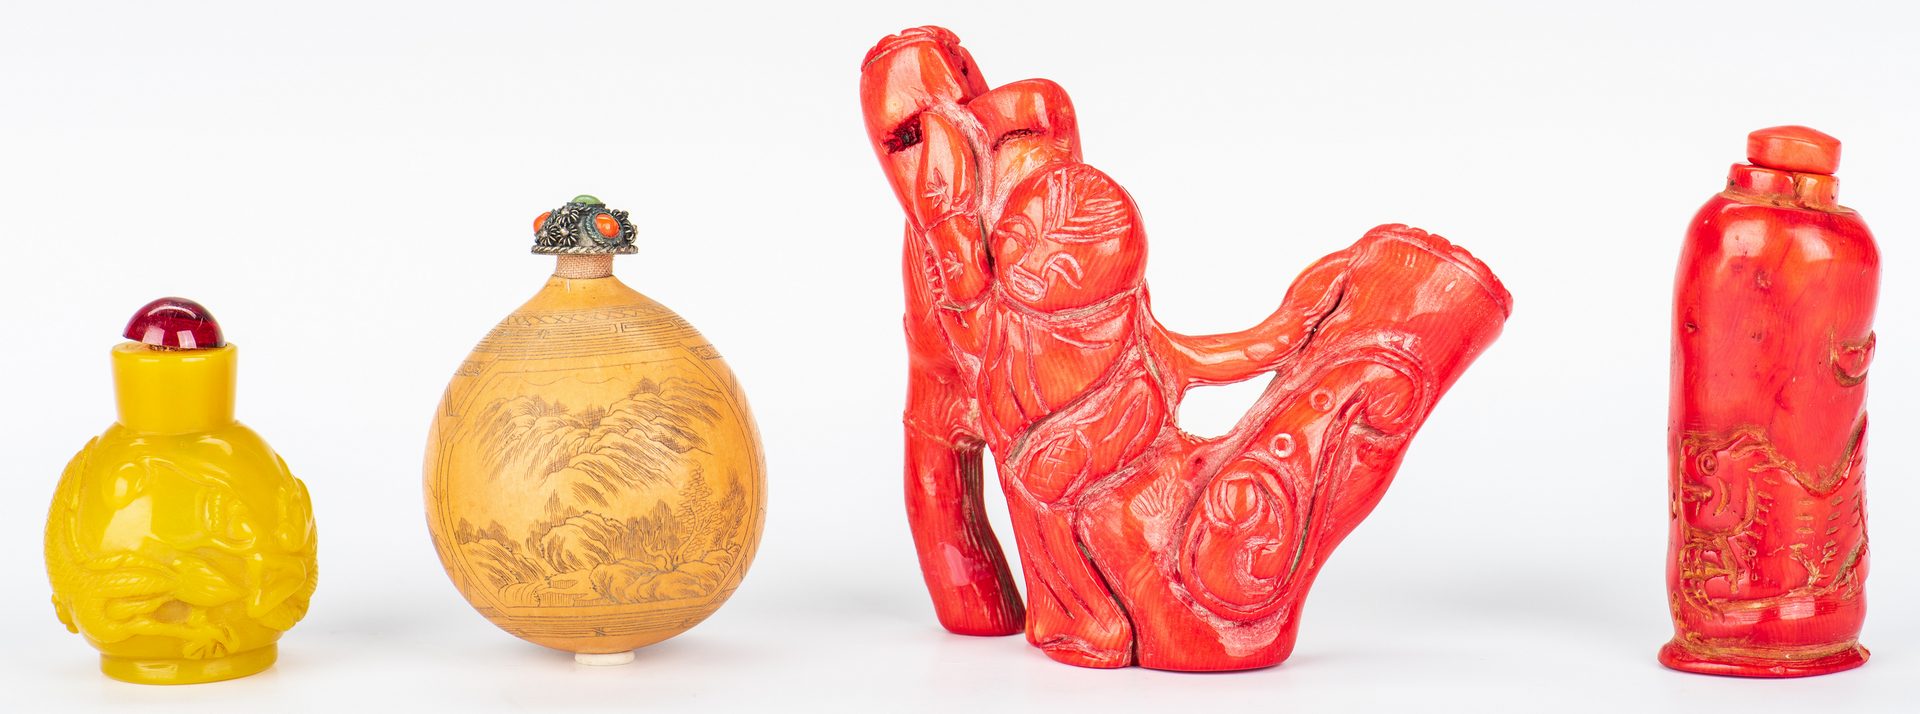 Lot 381: 7 Asian Snuff Bottles & 1 Carved Coral Figure, 8 pcs.